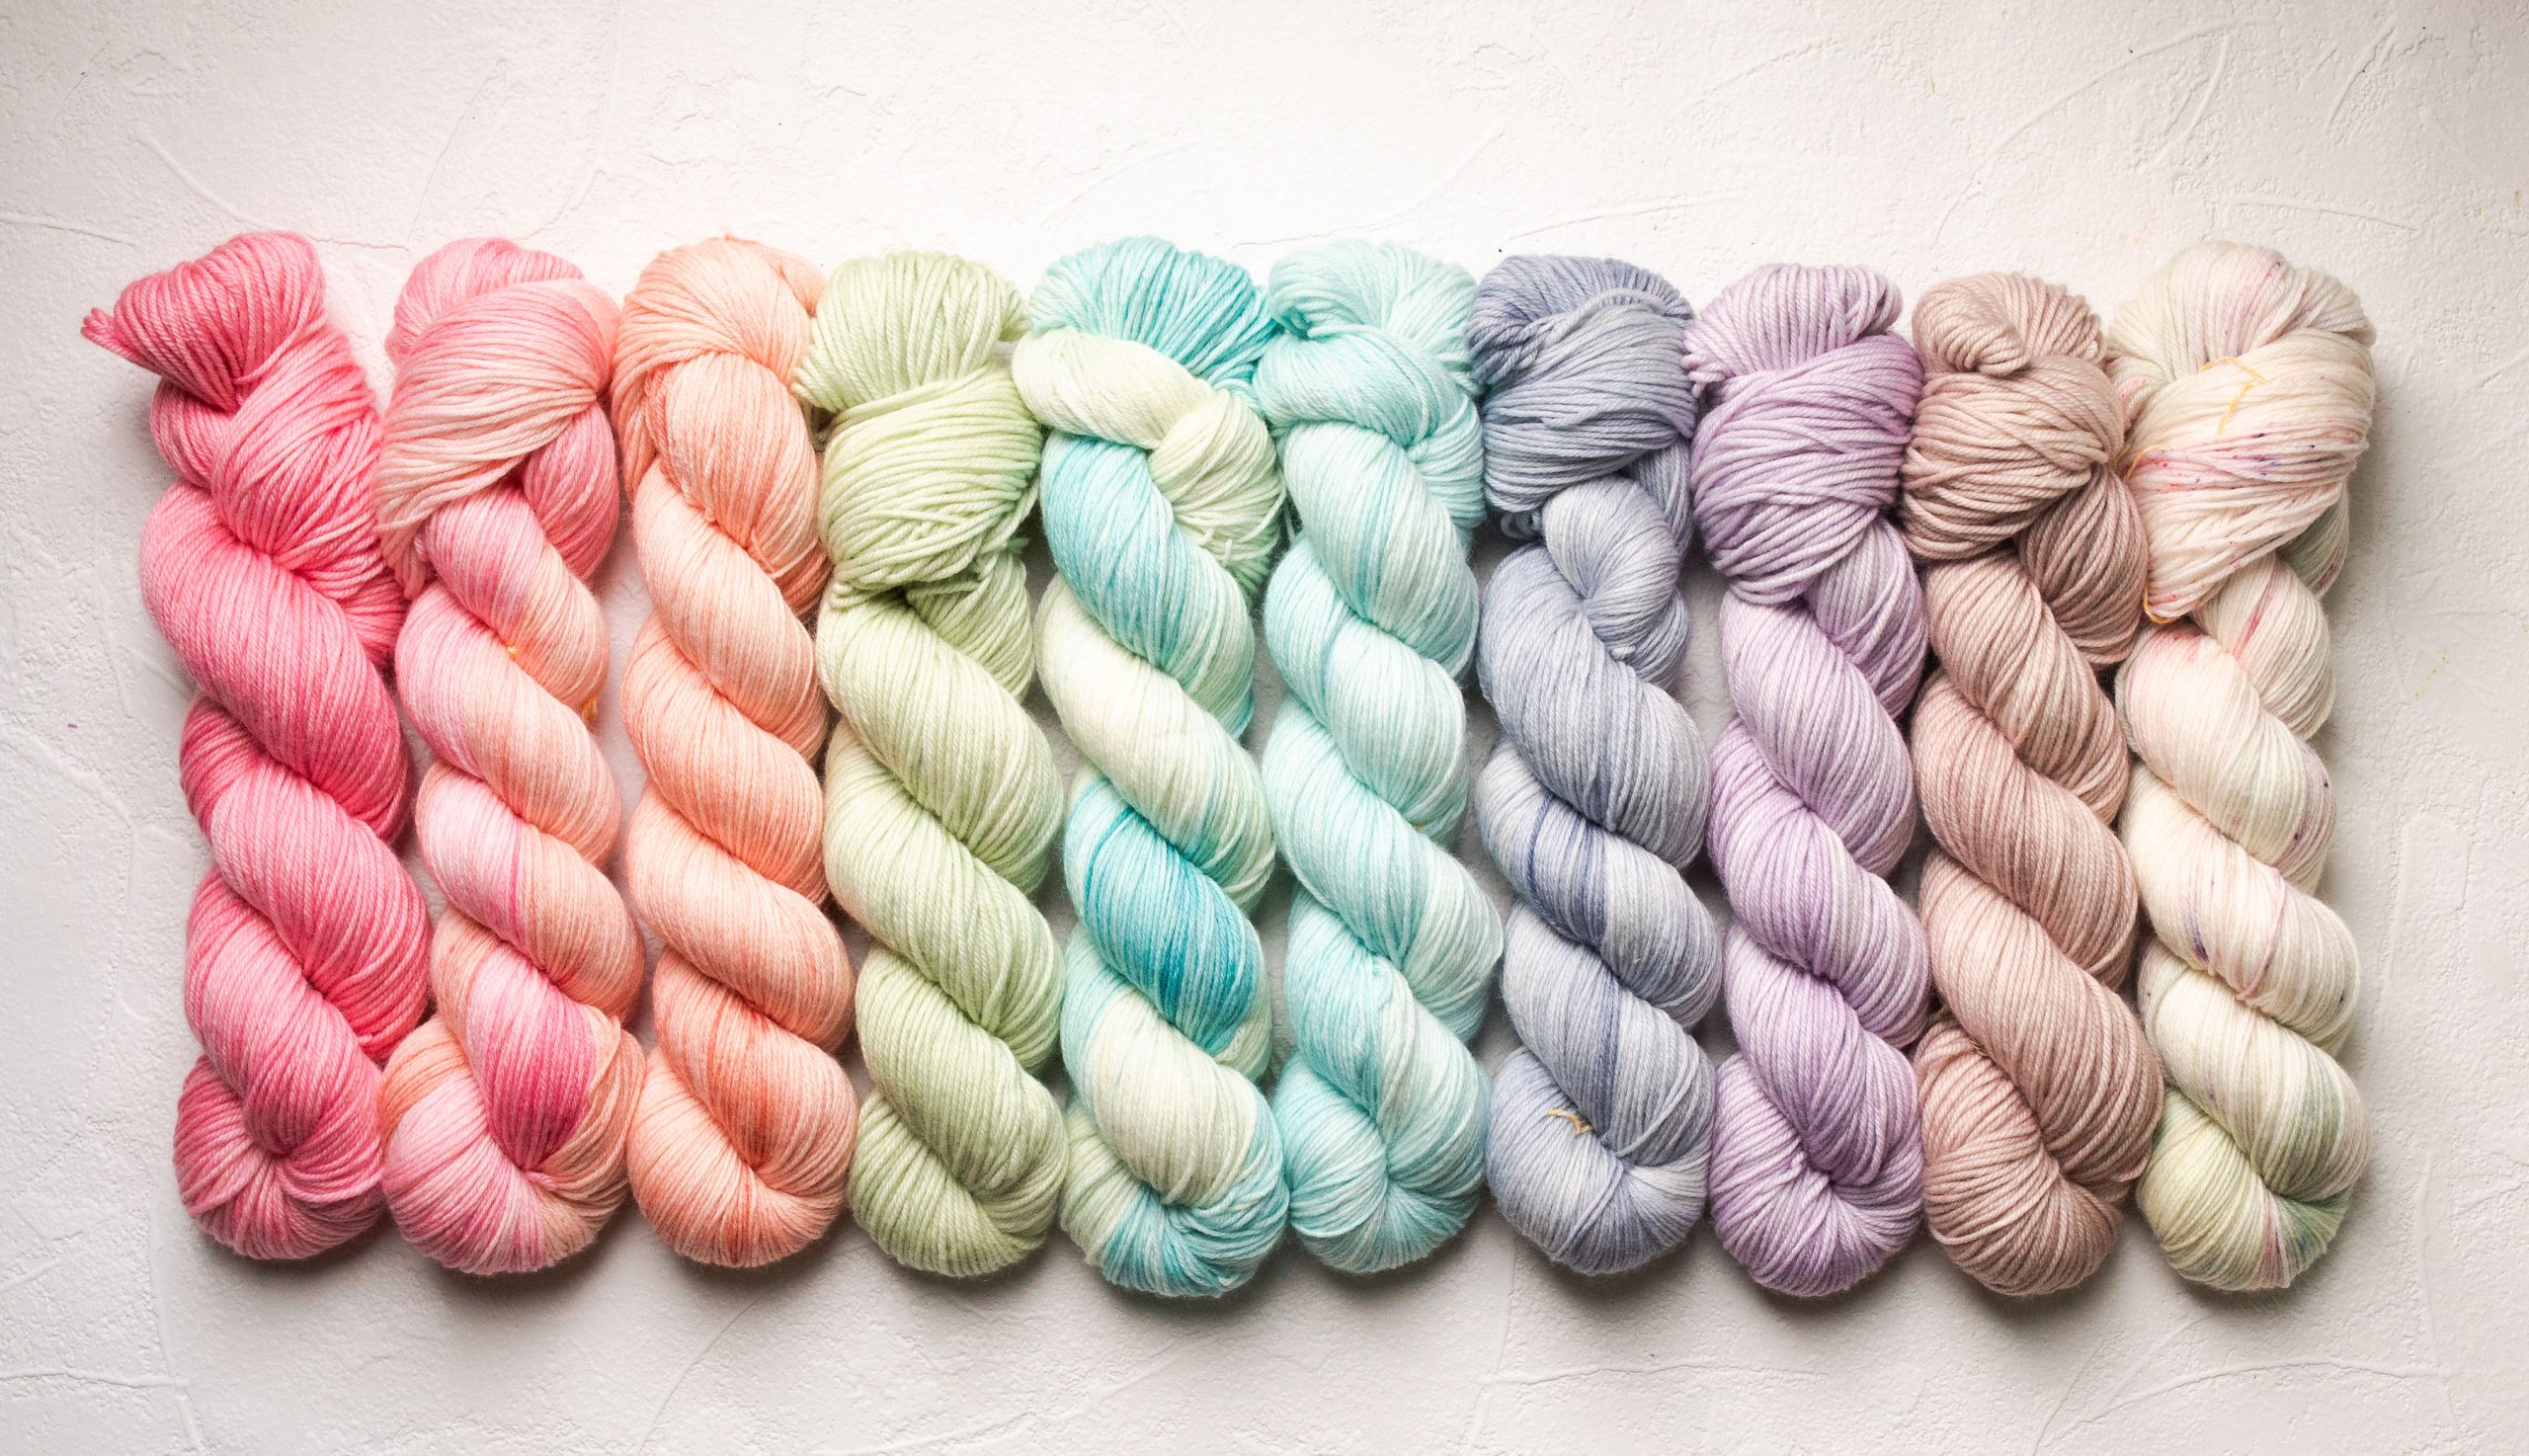 Hello New Adventure – We Are Dyeing Yarn! - Knits 'N Knots